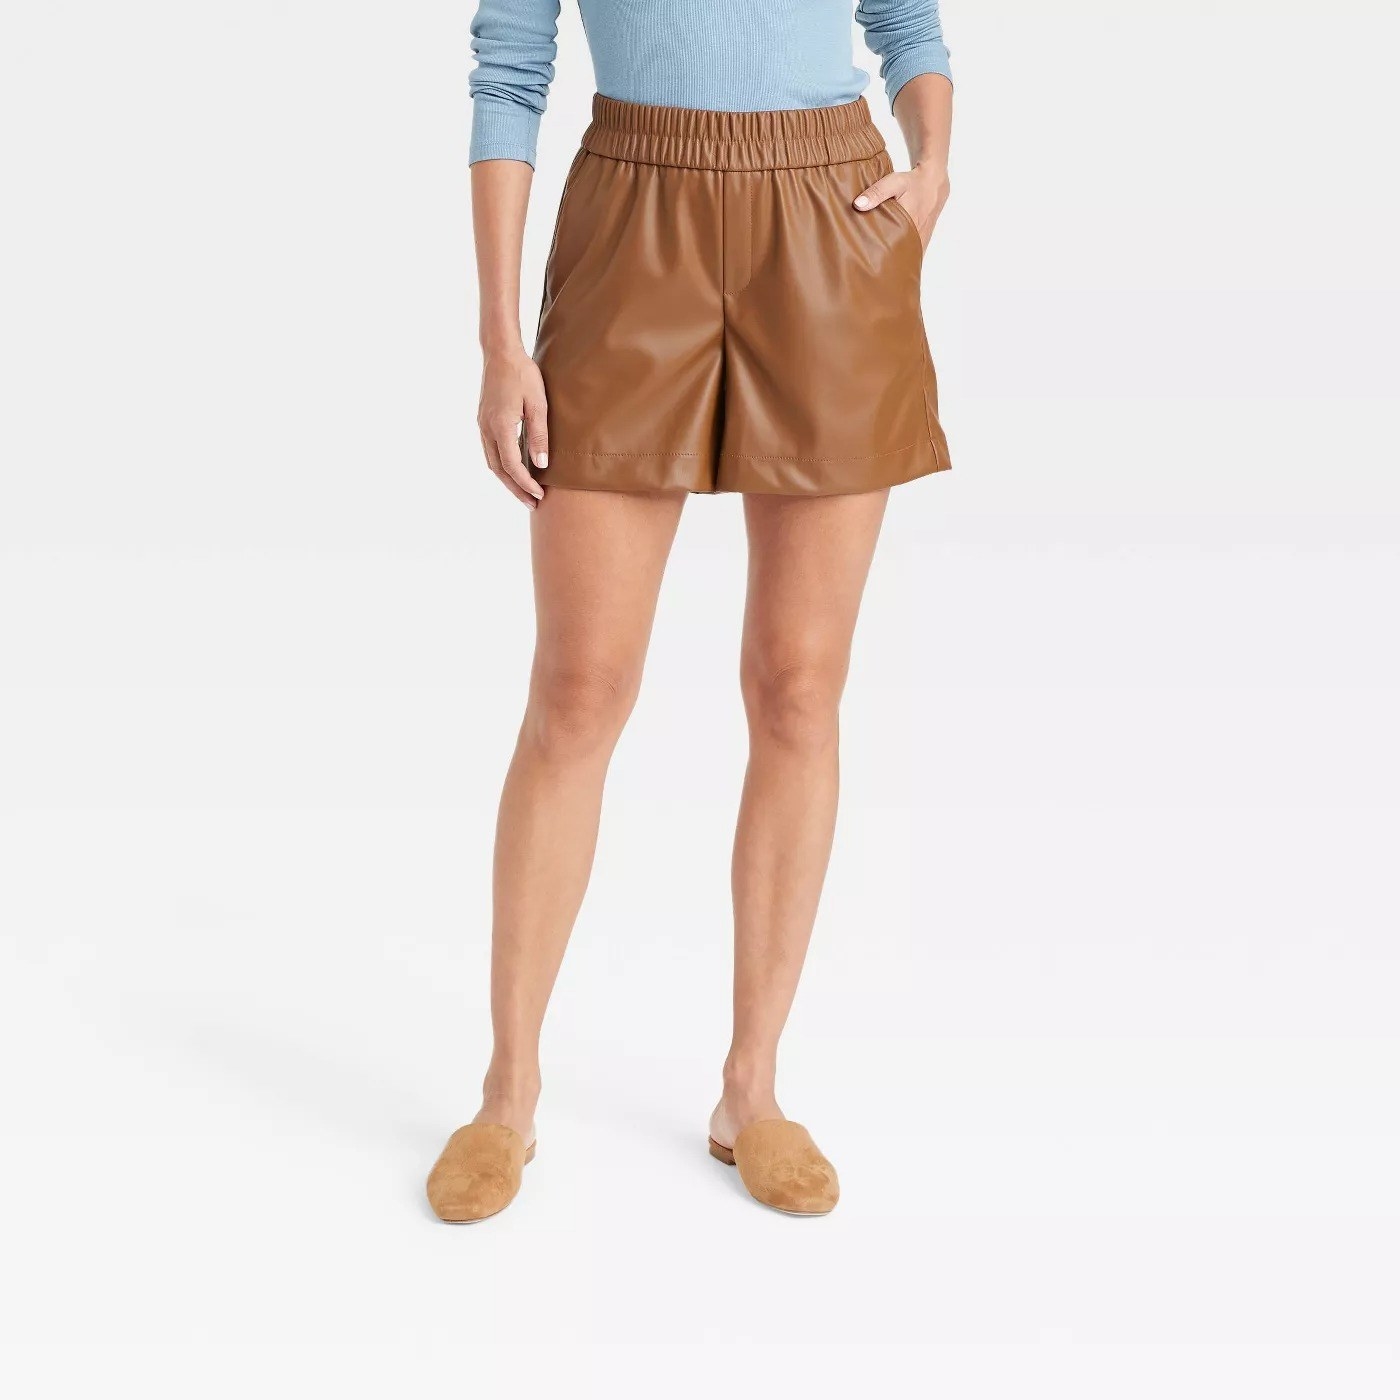 Model wearing camel colored shorts with elastic waistband, stops mid thigh